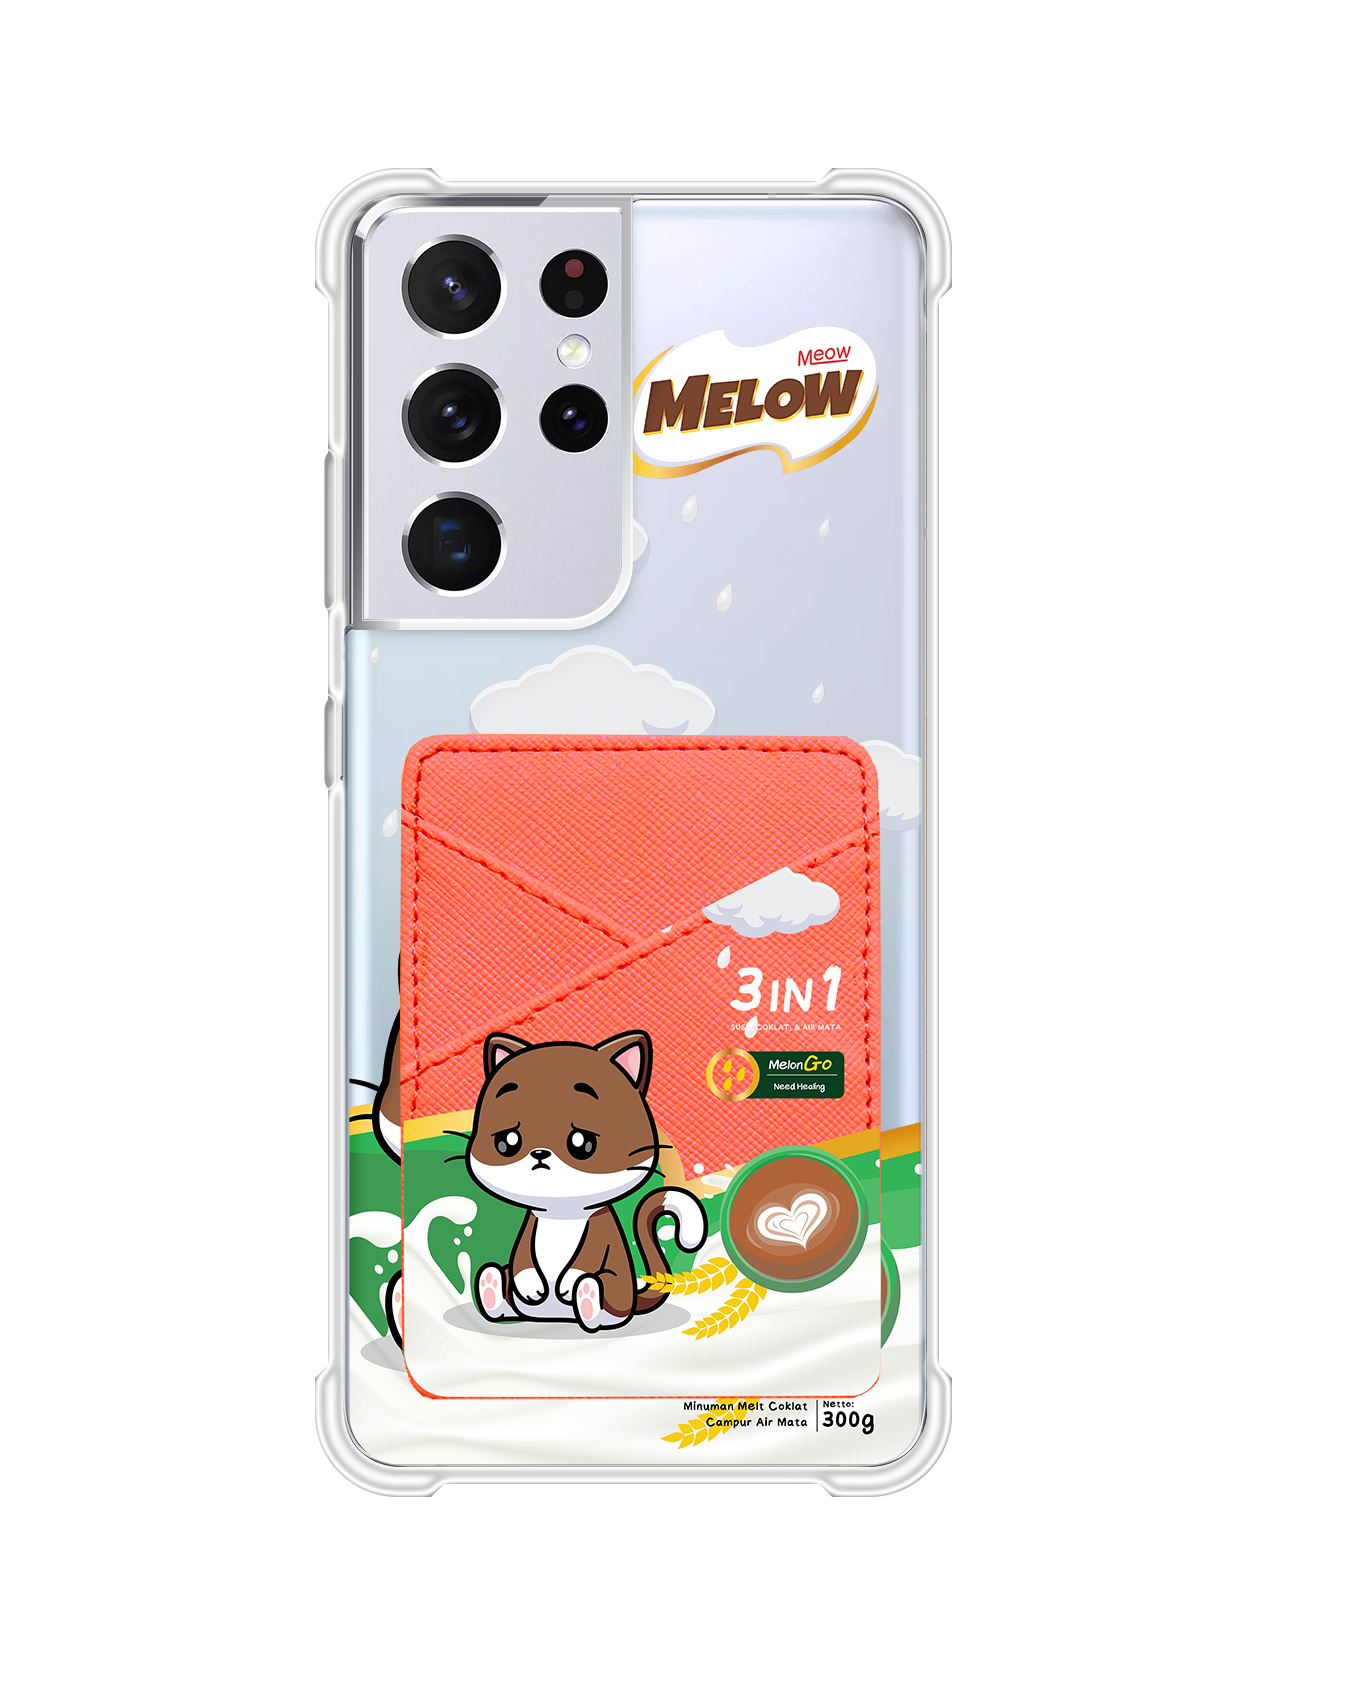 Android Phone Wallet Case - Melow